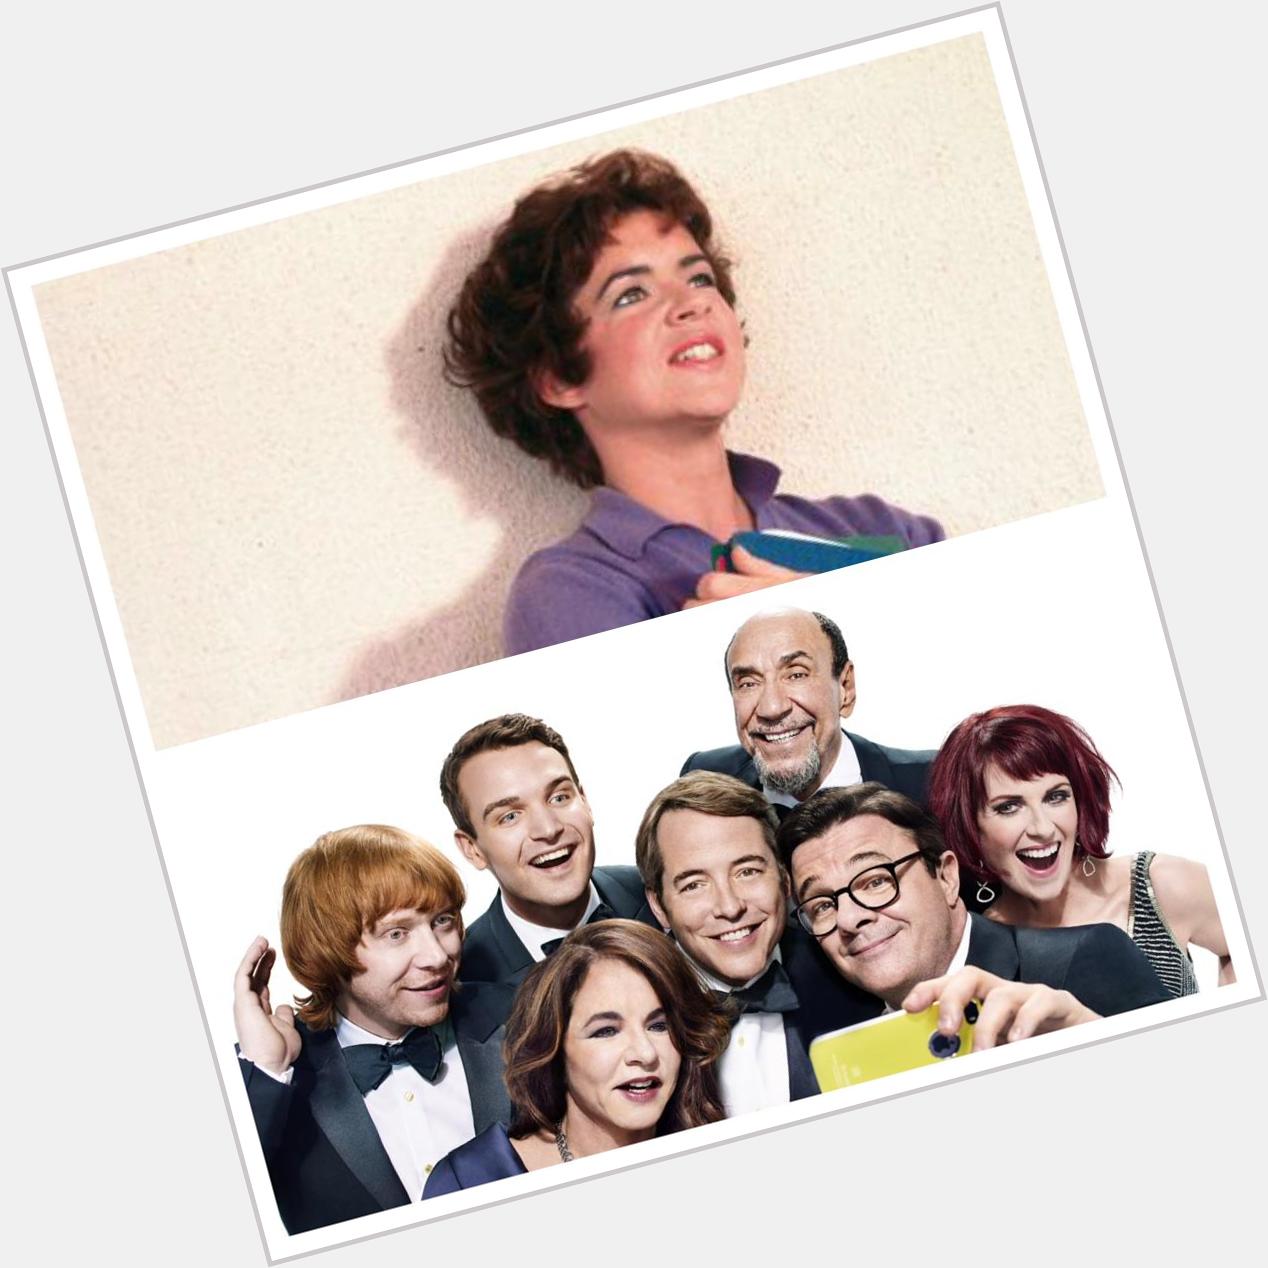 De \"Grease\" a \"It\s only a play\". Happy birthday Stockard Channing!. 